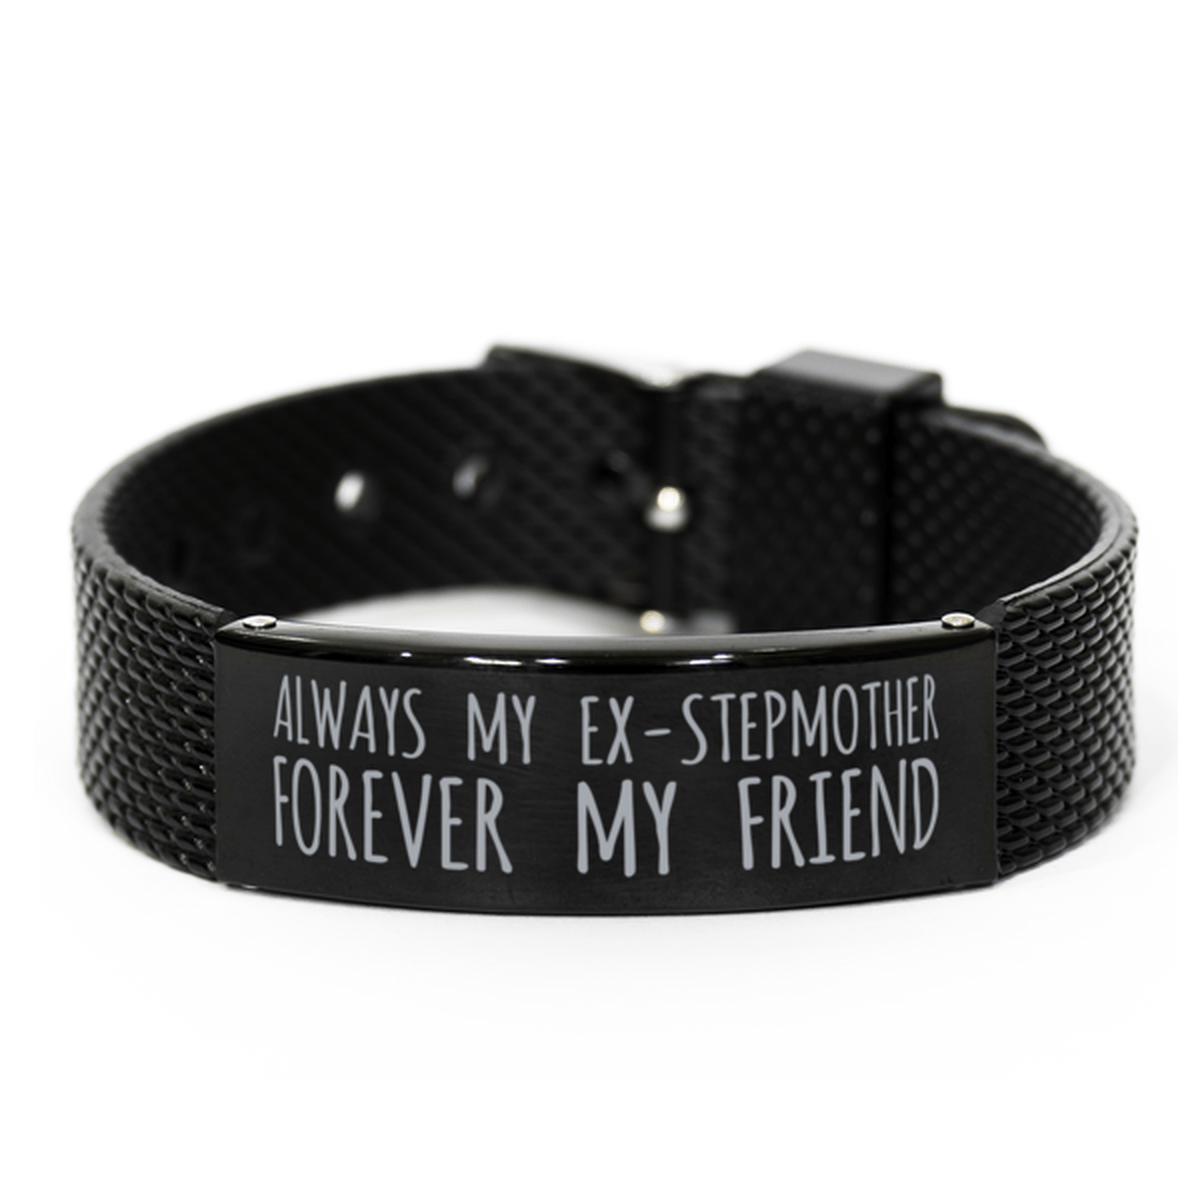 Inspirational Ex-Stepmother Black Shark Mesh Bracelet, Always My Ex-Stepmother Forever My Friend, Best Birthday Gifts for Family Friends